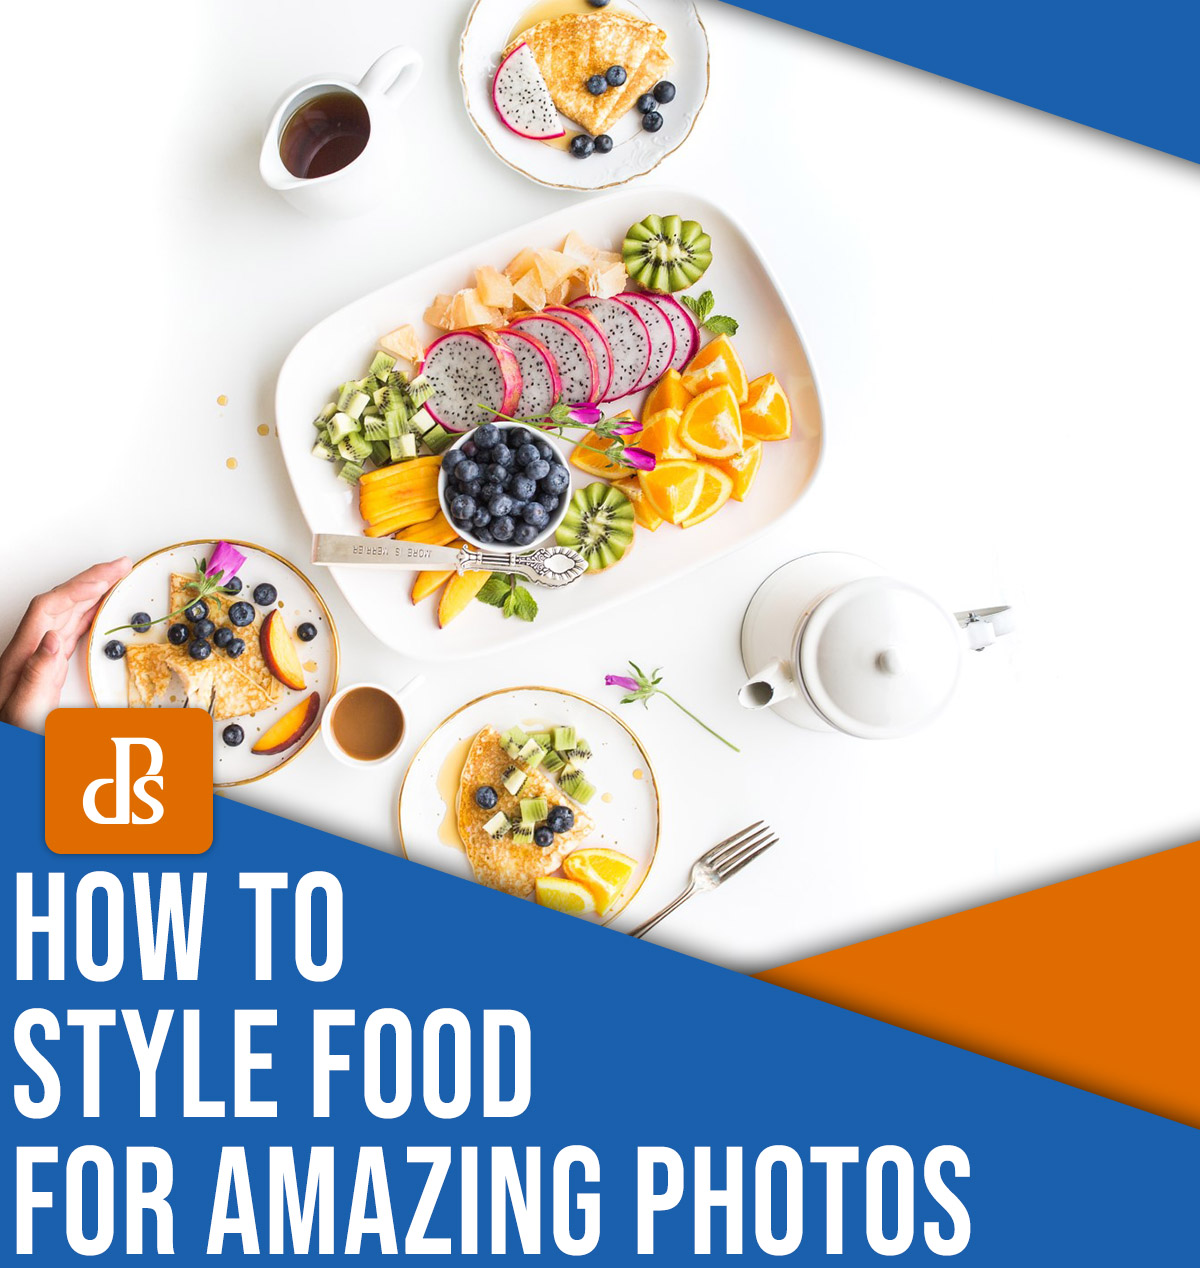 How to style food for amazing photos